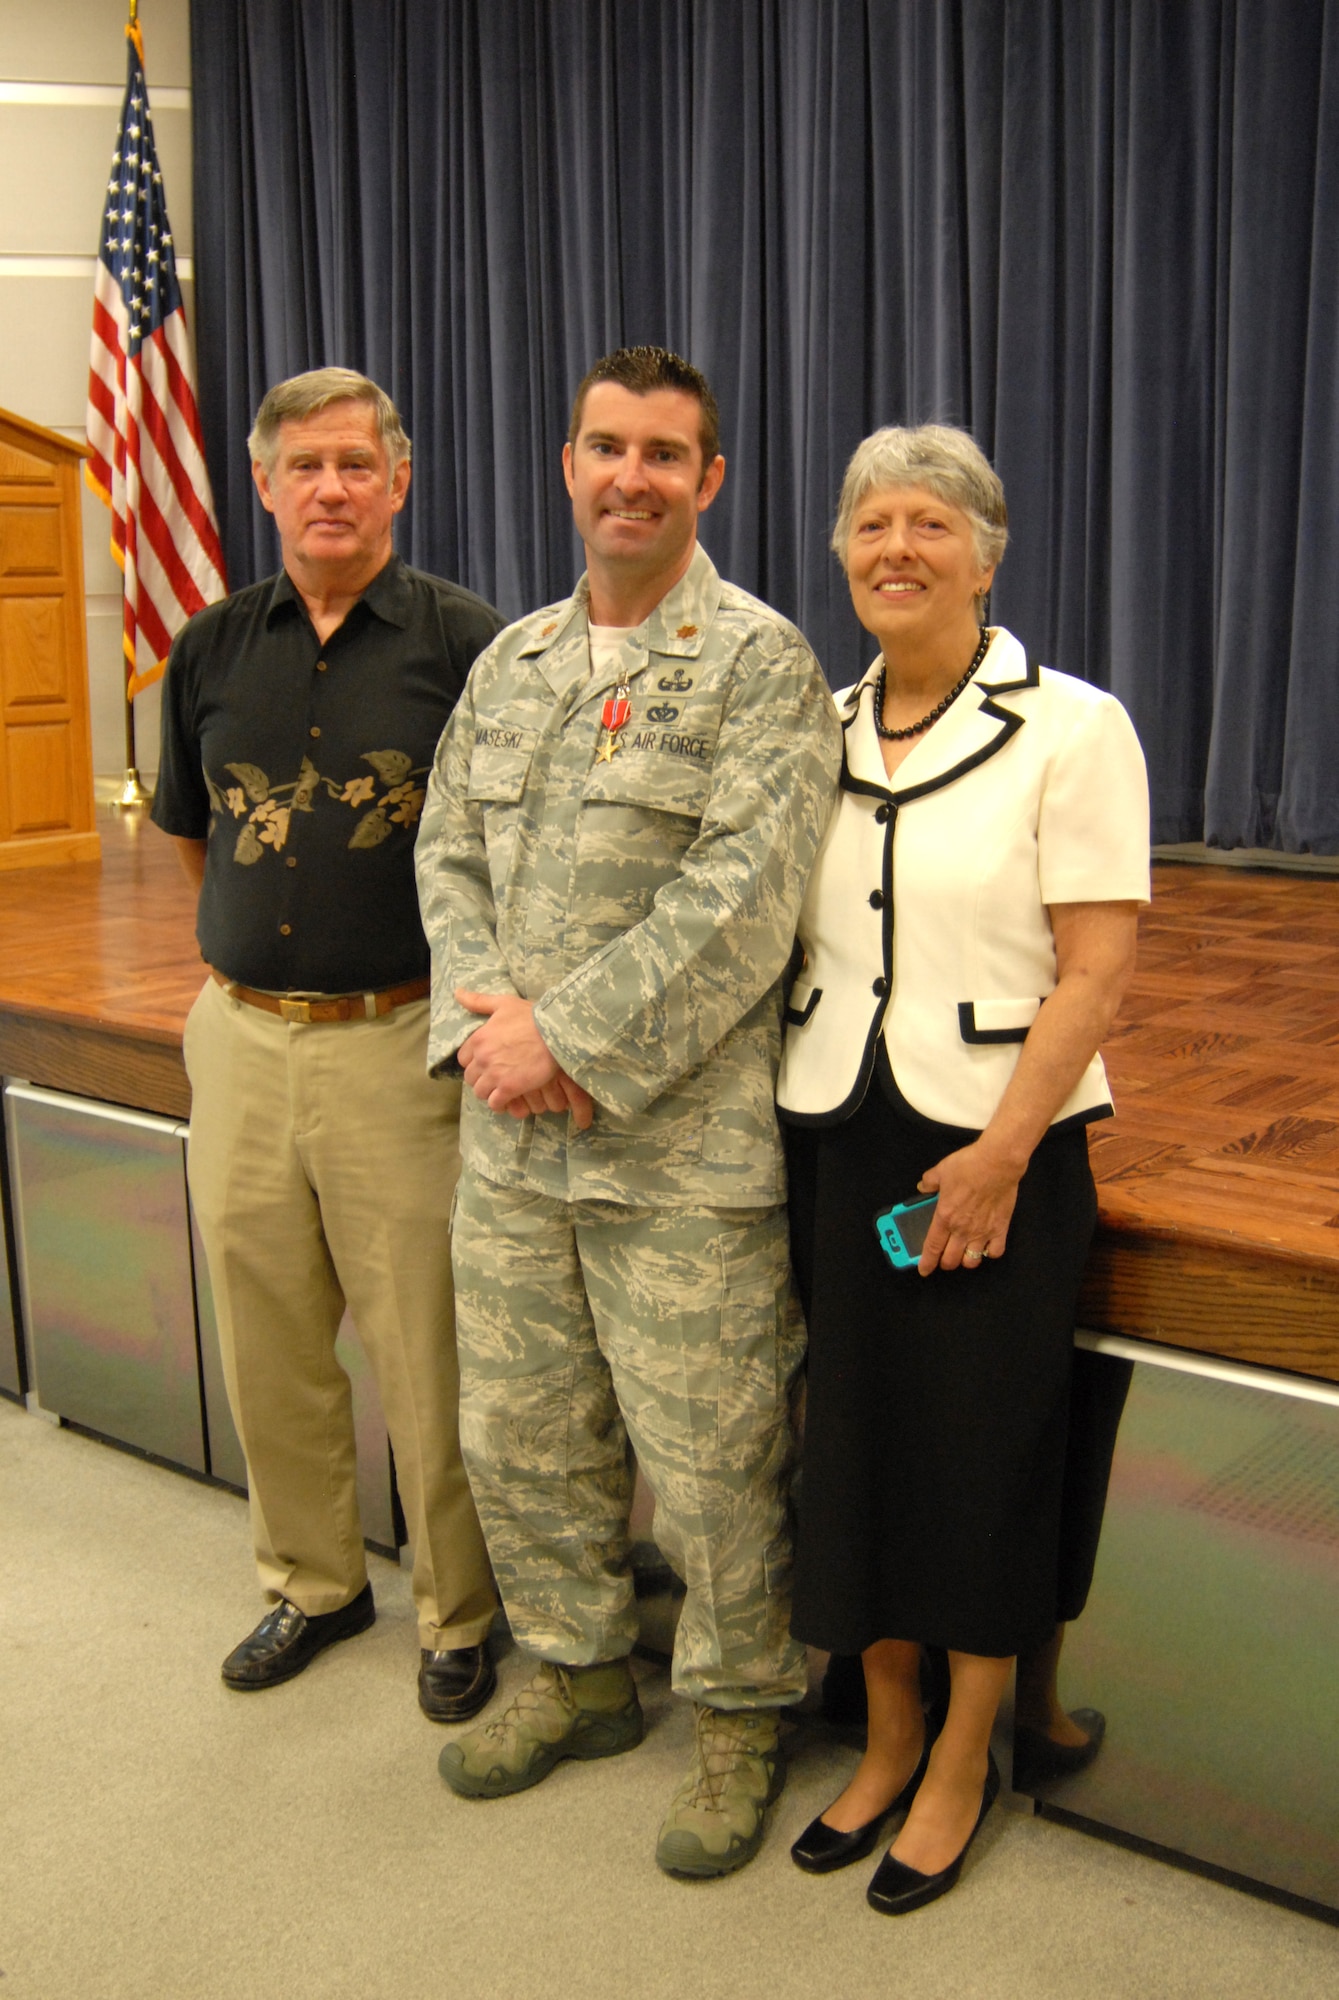 Air Force Maj. Devin Tomaseski, base civil engineer, 166th Civil Engineer Squadron, 166th Airlift Wing, Delaware ANG, with his parents, William and Cathy Tomaseski, after Maj. Tomaseski received the Bronze Star medal at a ceremony held at 166th AW HQ, New Castle ANG Base, New Castle, Del. on June 20, 2014. Tomaseski distinguished himself by exceptionally meritorious service while deployed in support of Operation Enduring Freedom in Afghanistan from 2011 to 2012. This is the third Bronze Star medal awarded to Tomaseski. (U.S. Air National Guard photo by Tech. Sgt. Benjamin Matwey)